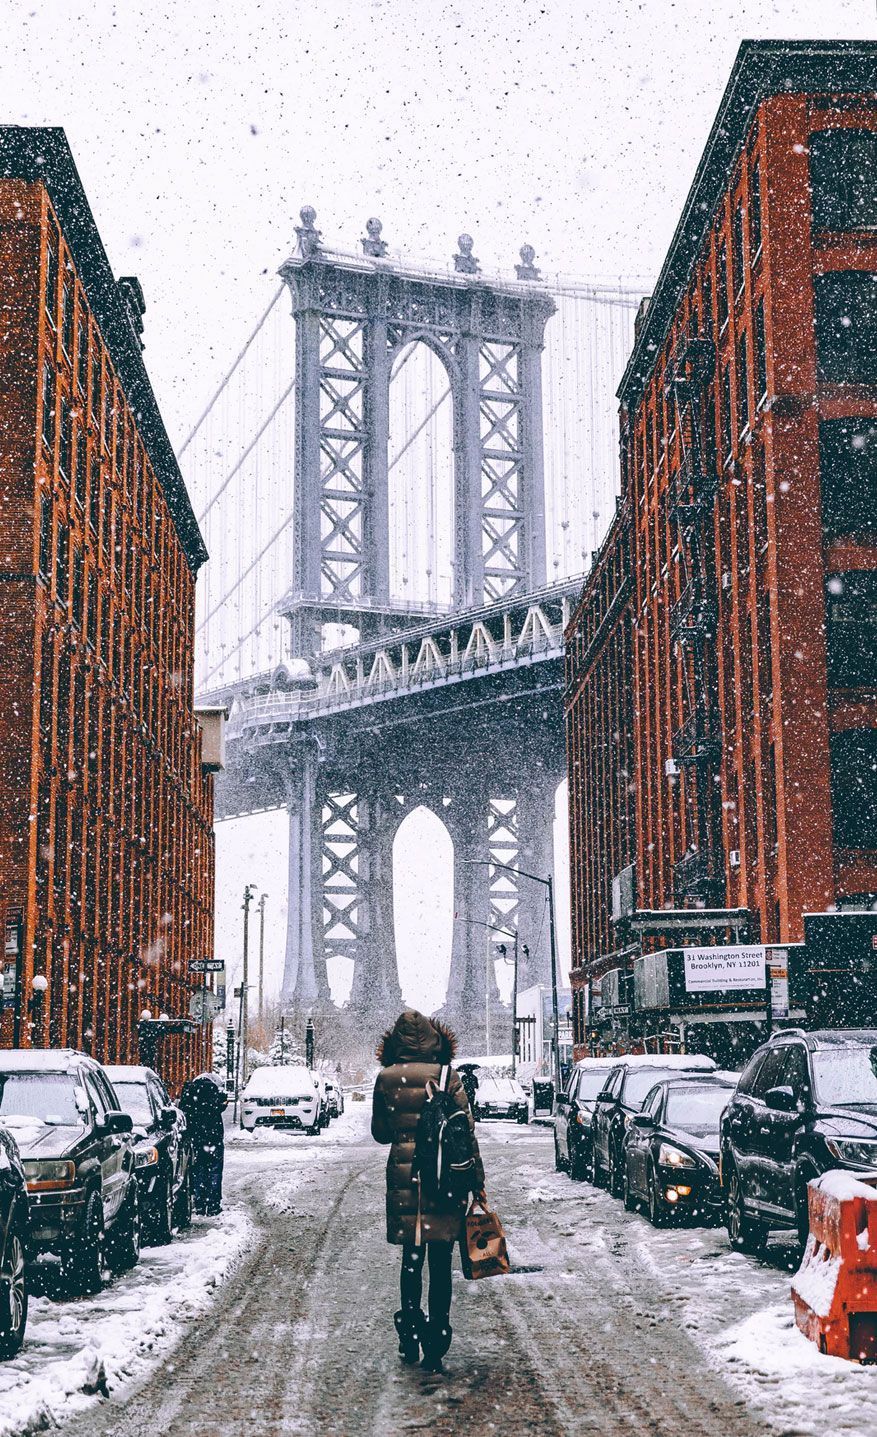 iPhone wallpaper awesome iphone wallpaper to download , Winter iPhone wallpaper, snow iphone wall. New york city travel, New york city guide, New york travel